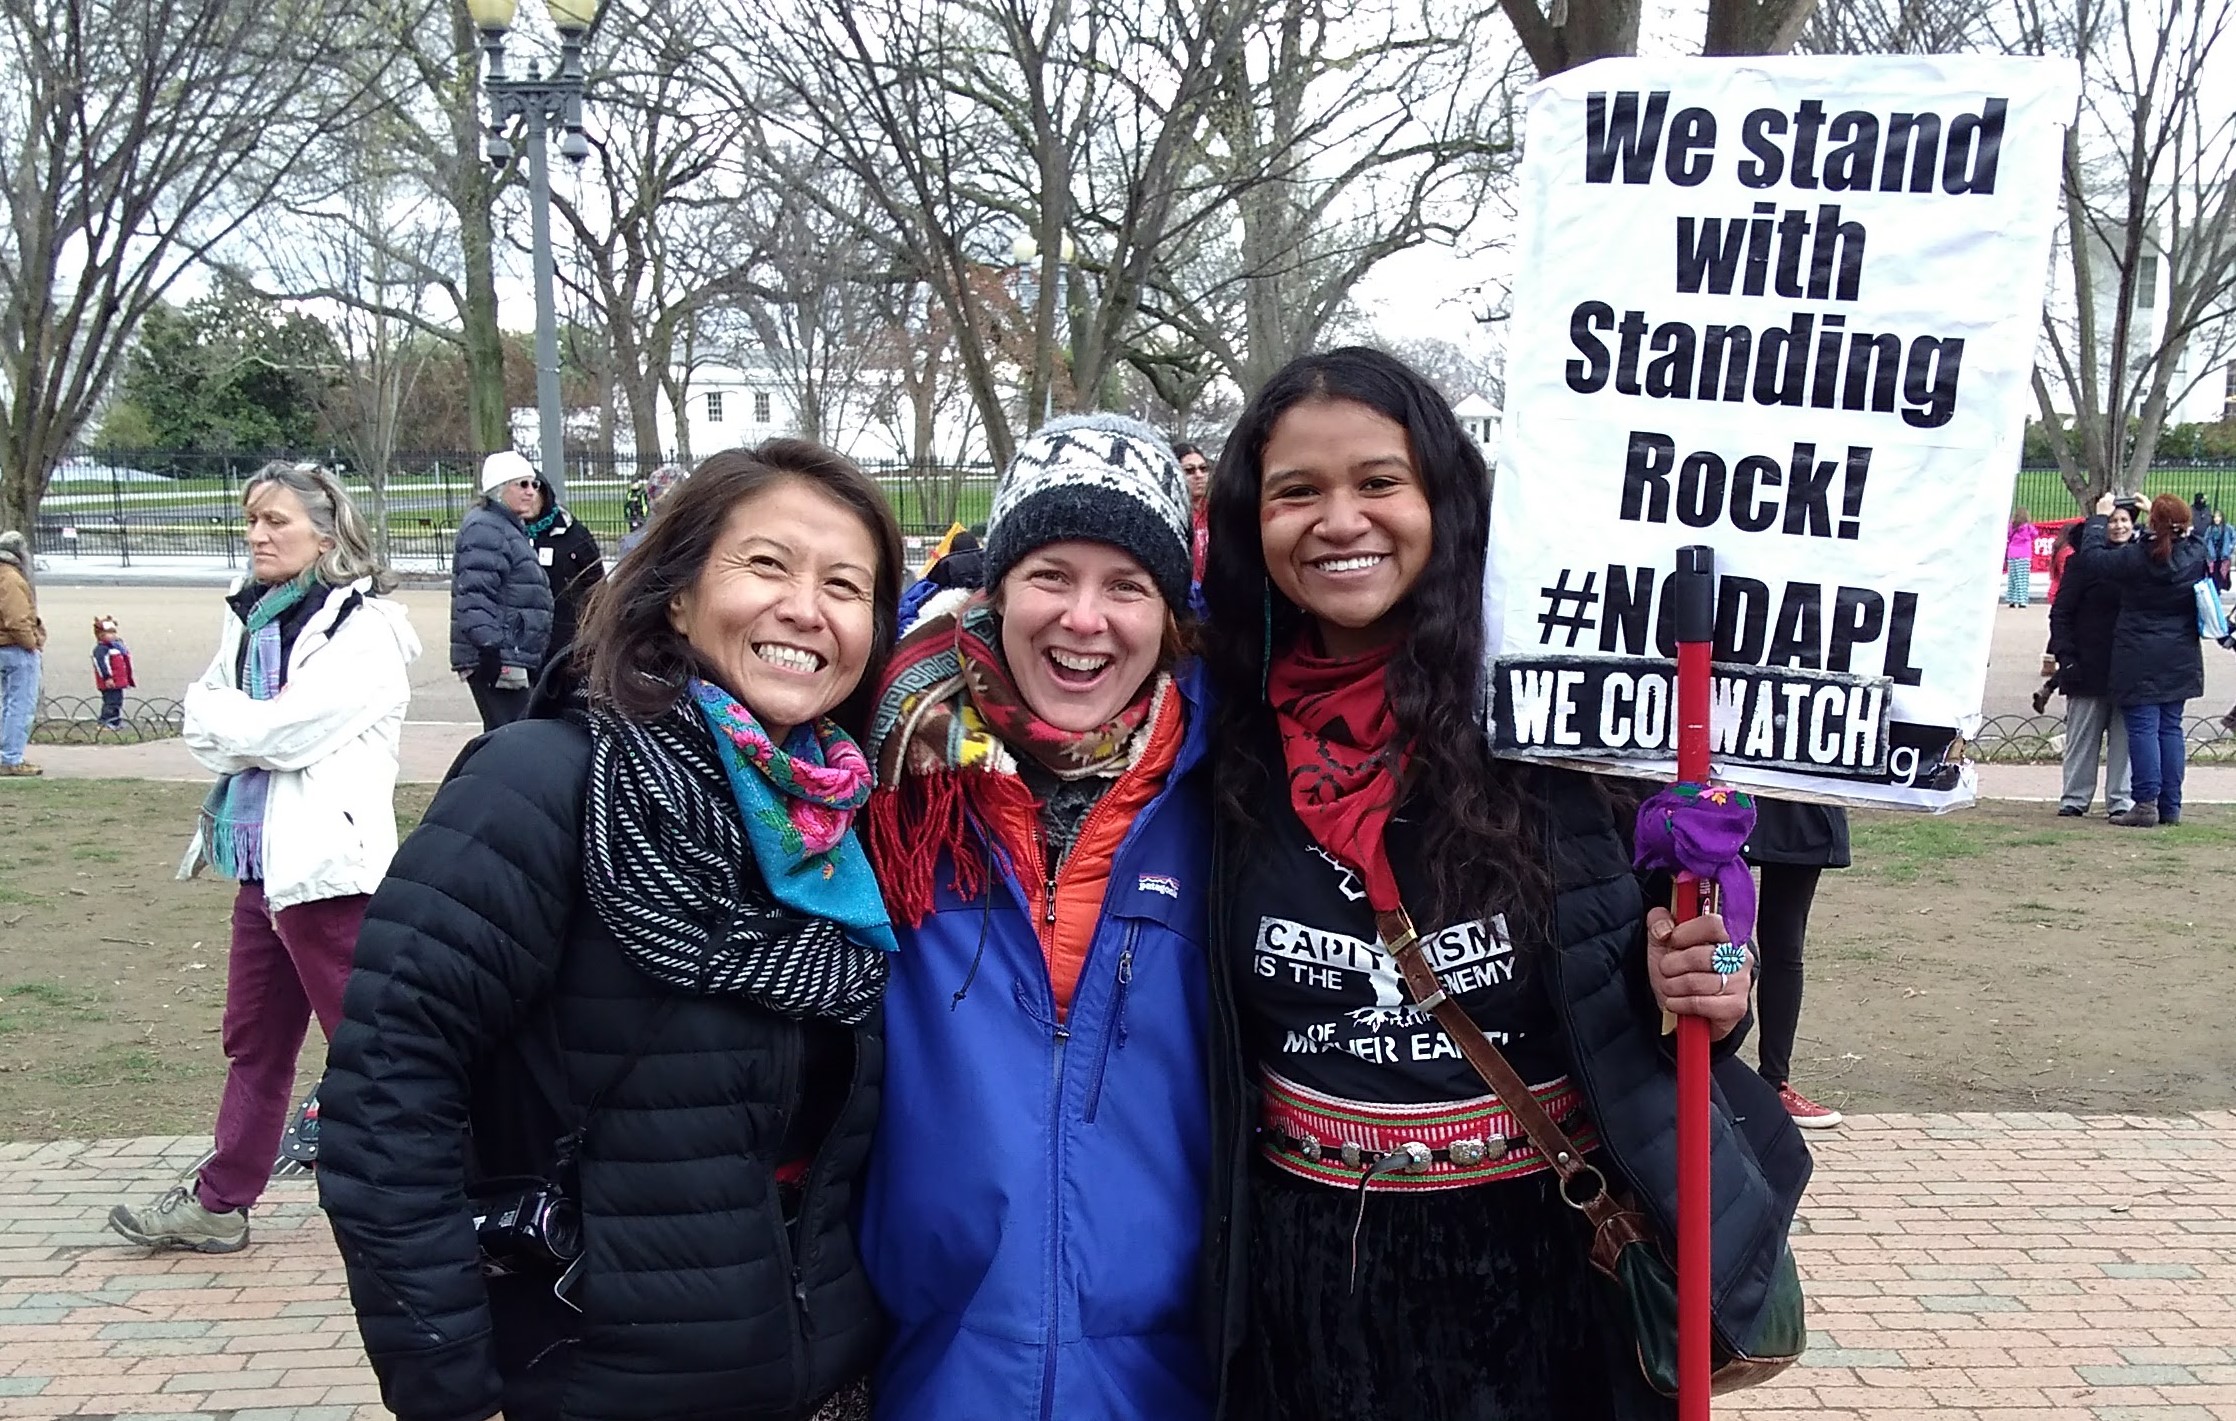 3 Standing Rock participants at Indigenous Rising gathering in DC